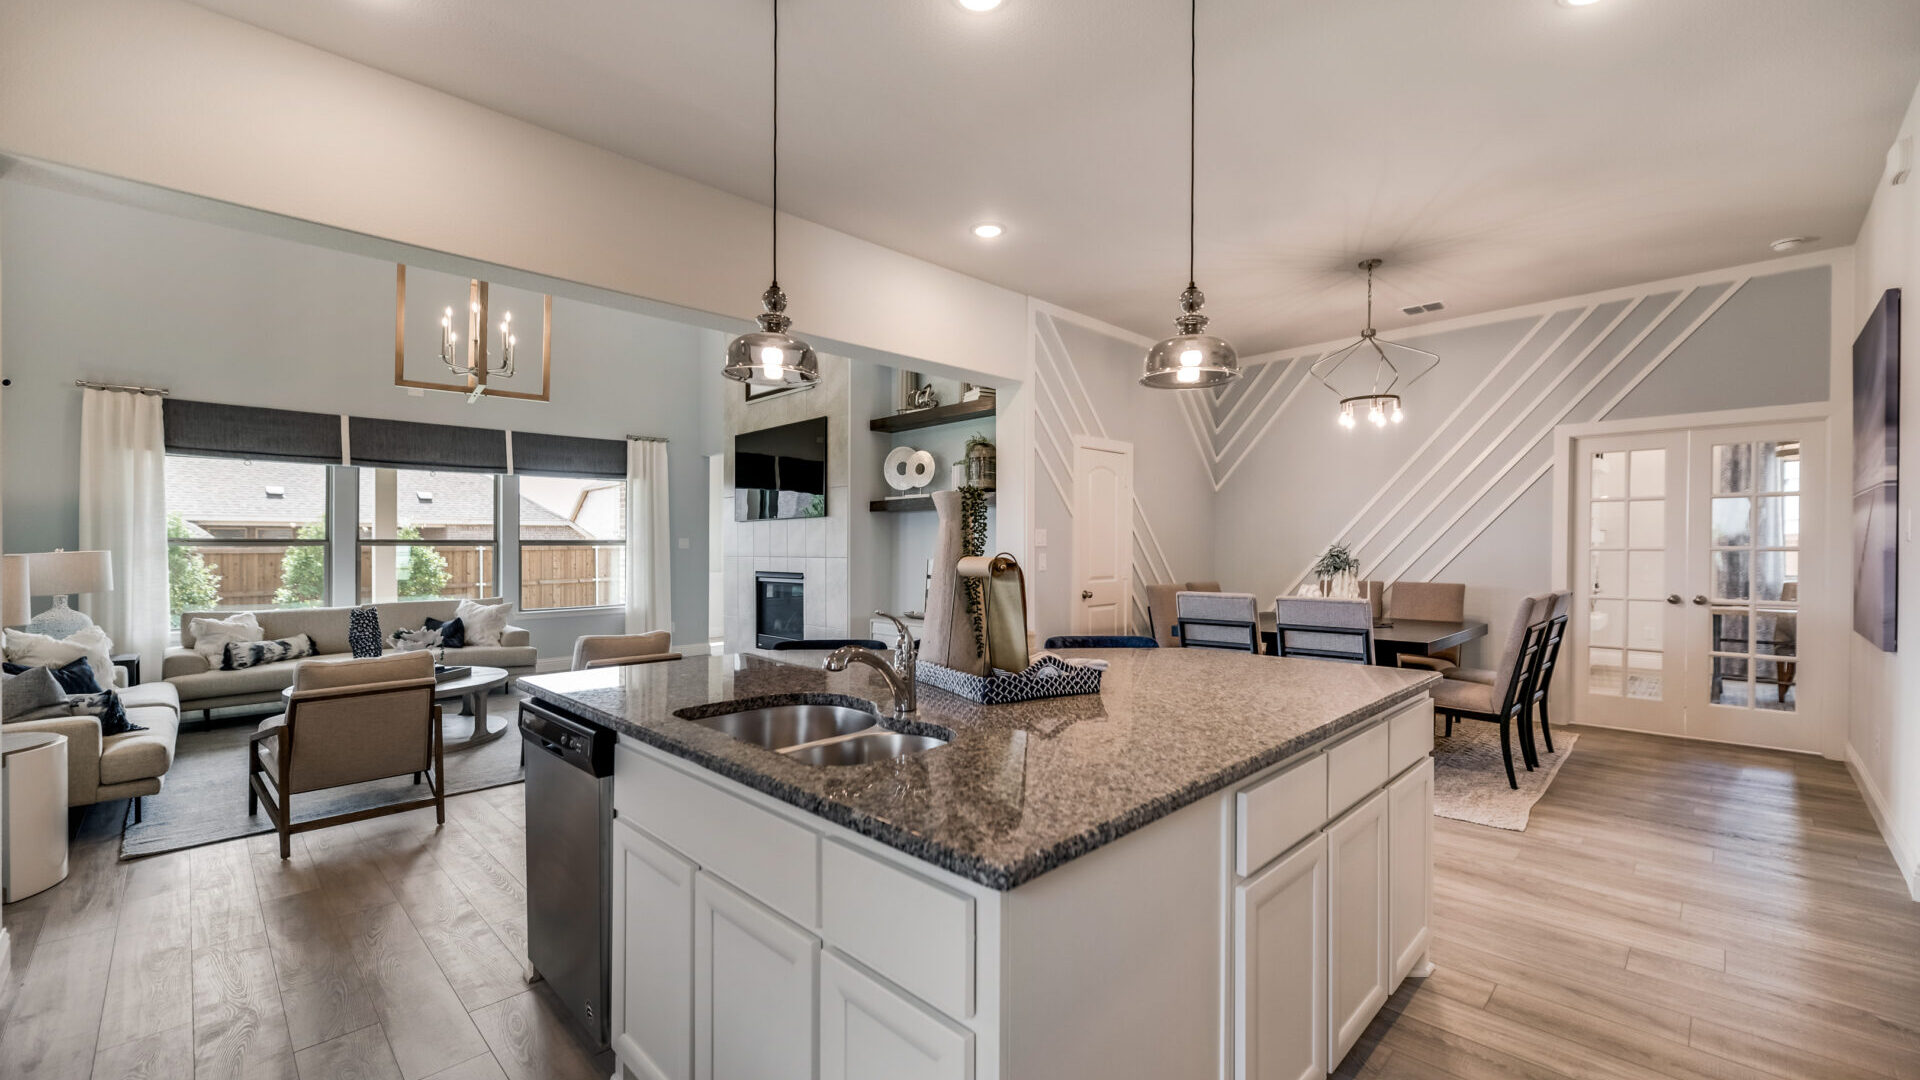 Elevon South - Three New Models Now Open! new homes in Lavon, TX